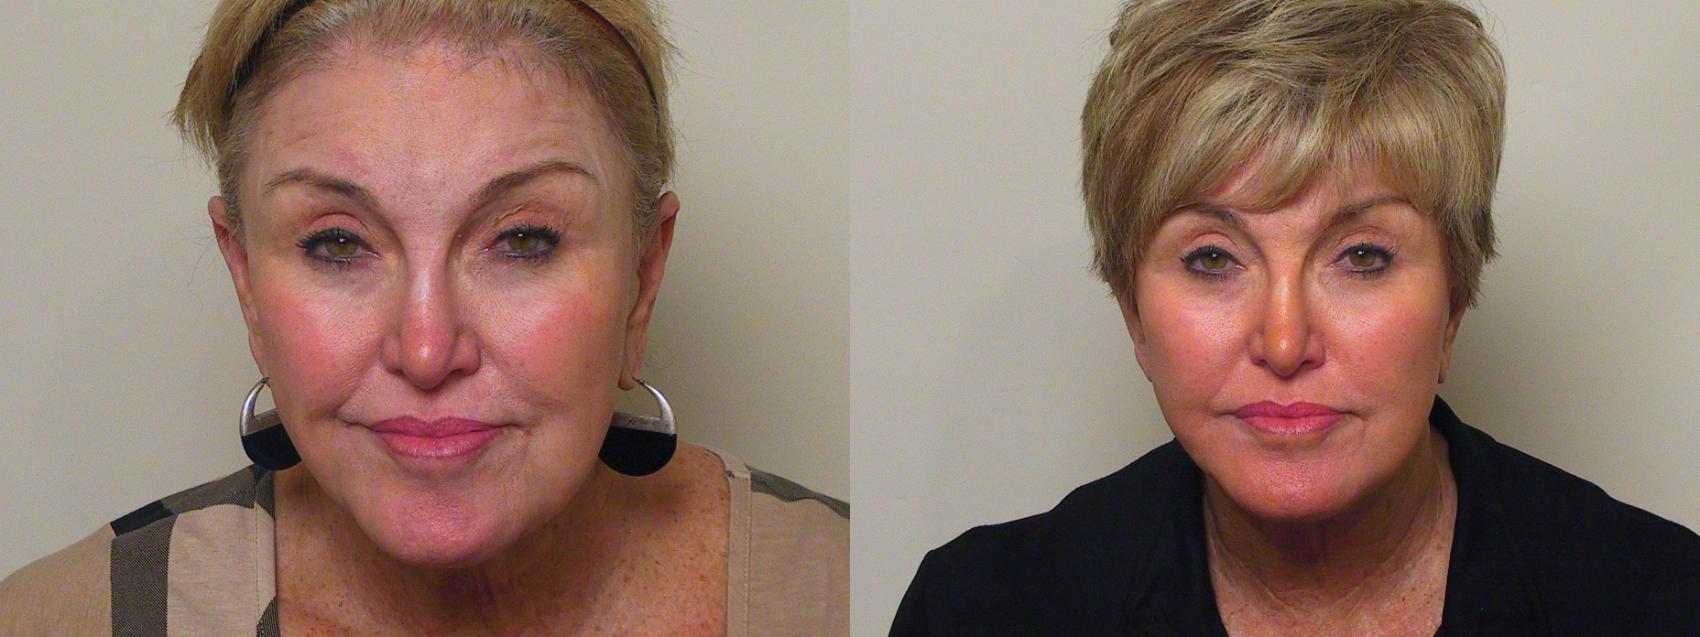 Facelift Before And After Pictures Case Atlanta Georgia